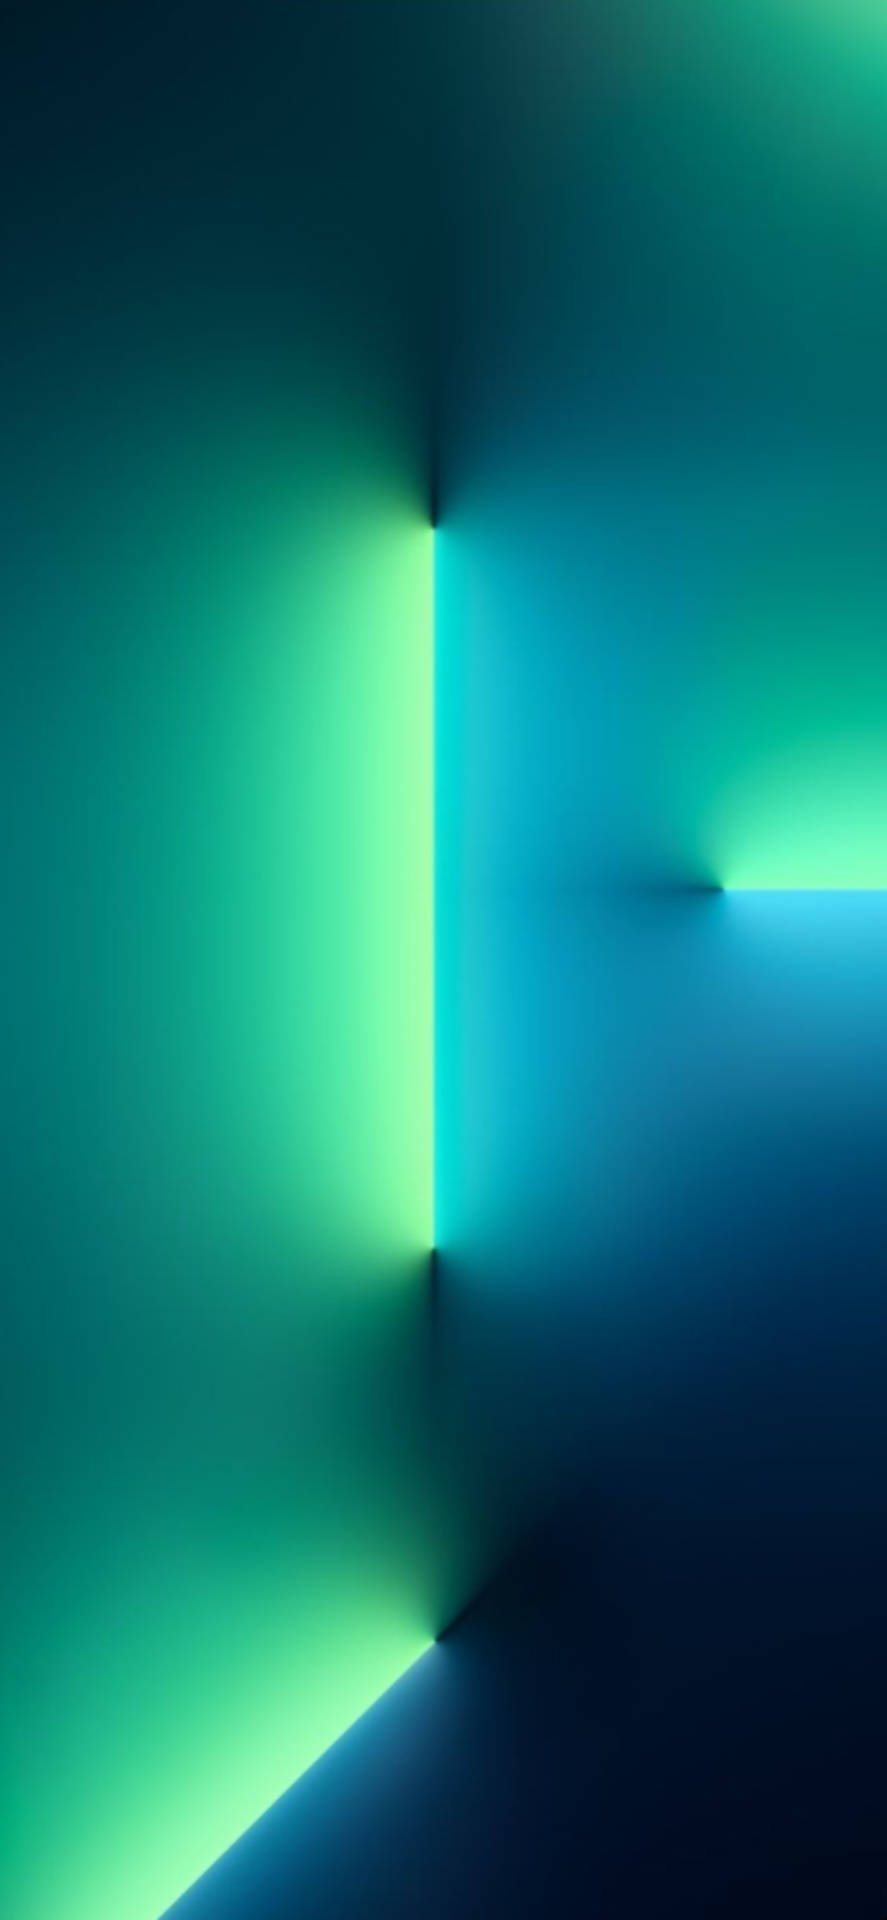 Iphone 13 Pro Max Green Lights Background